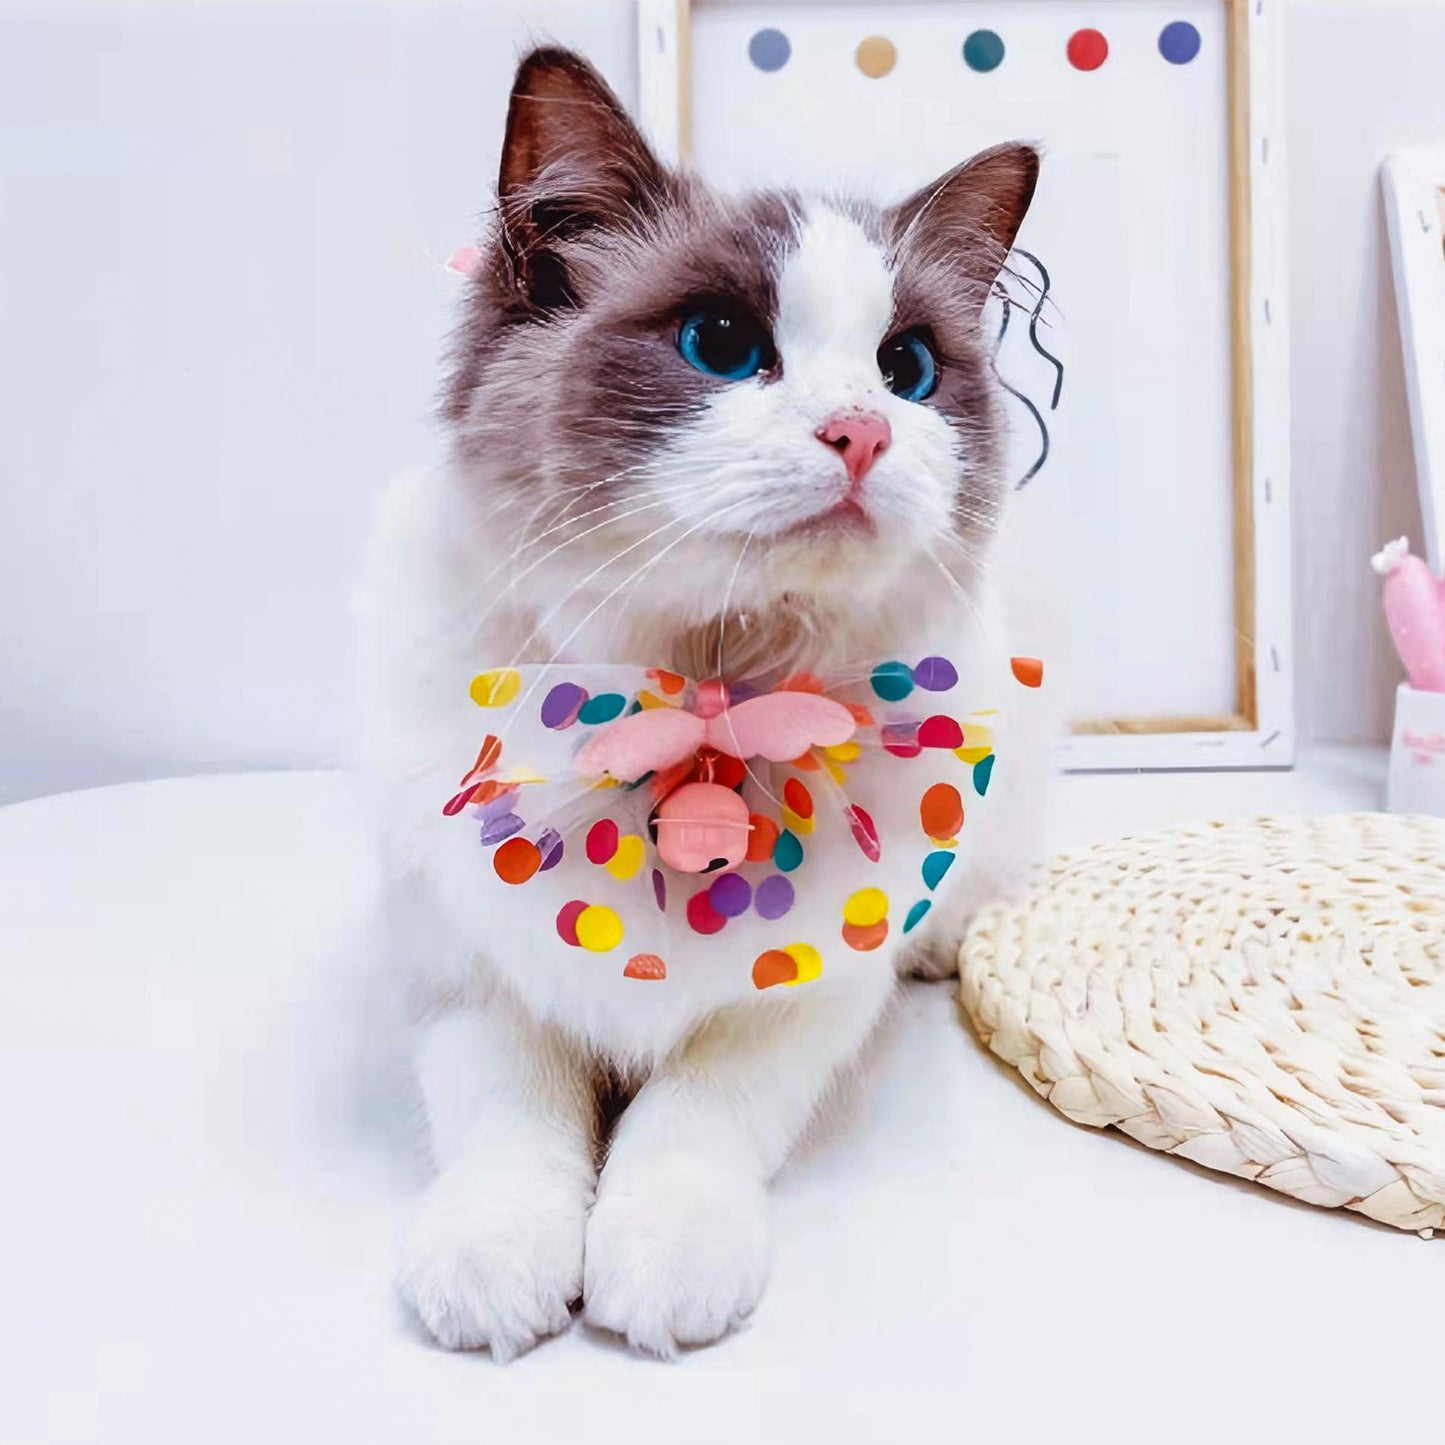 Cat Dog Collars with Bow Tie & Bell 2PCS Pet Safety Mesh Lace Colorful 2 Colors